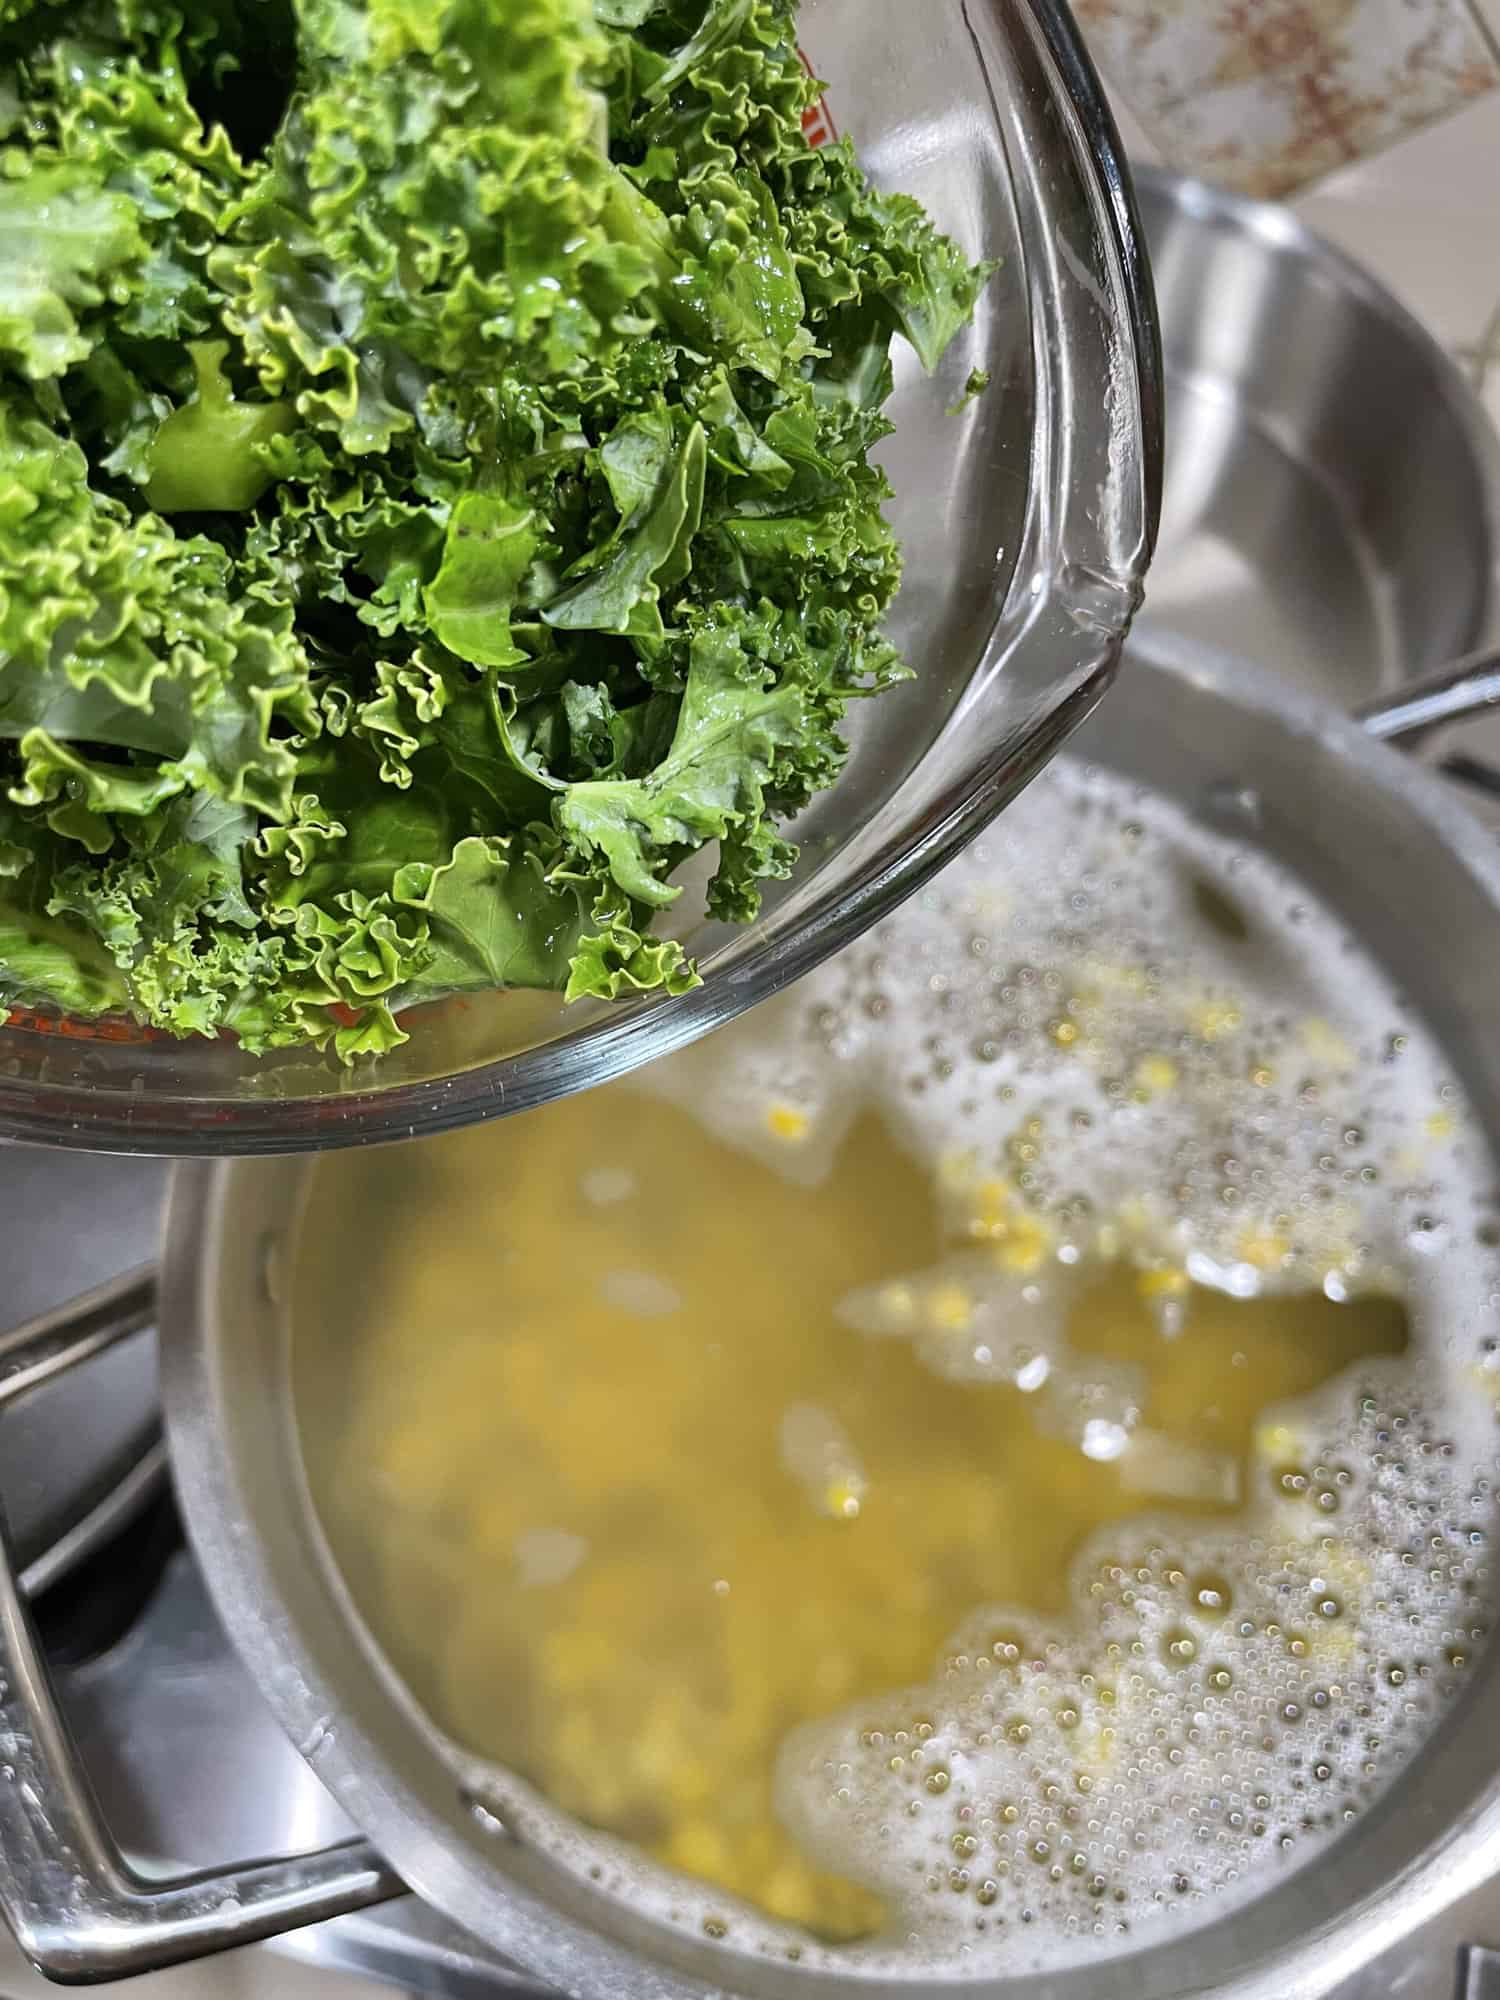 add kale to boiling water